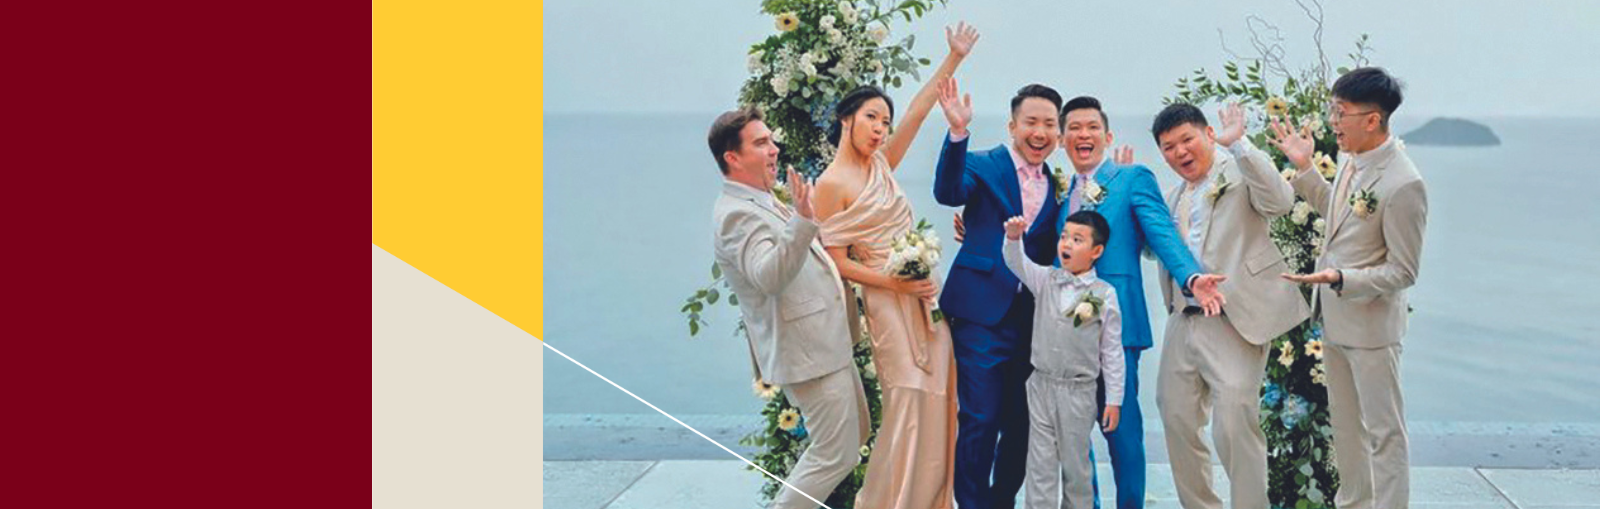 Alum Eric Lean and Matthew Aoyama posing with wedding party by the ocean.